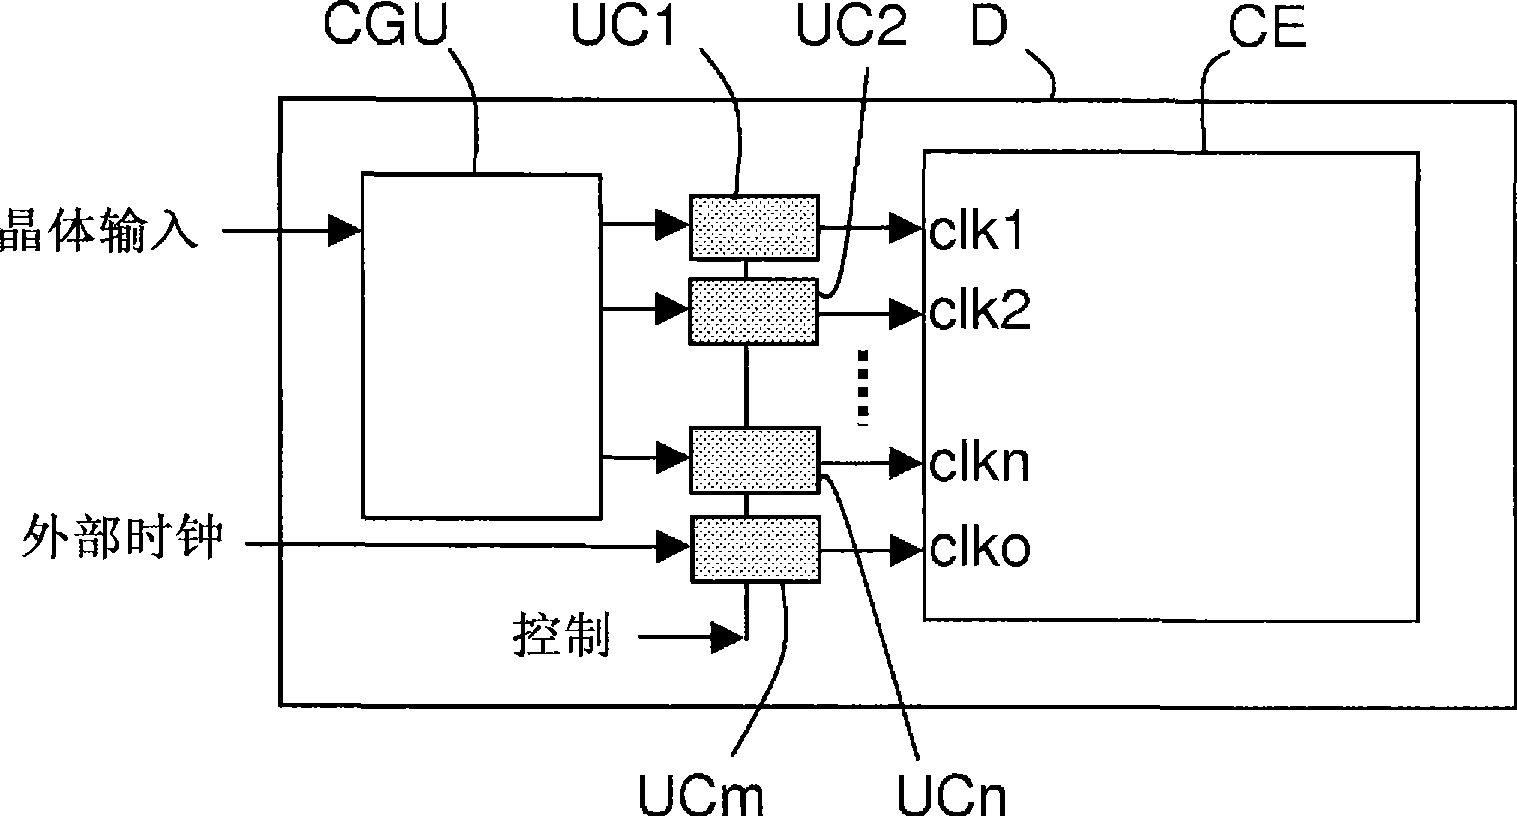 Multi-clock system-on-chip with universal clock control modules for transition fault test at speed multi-core